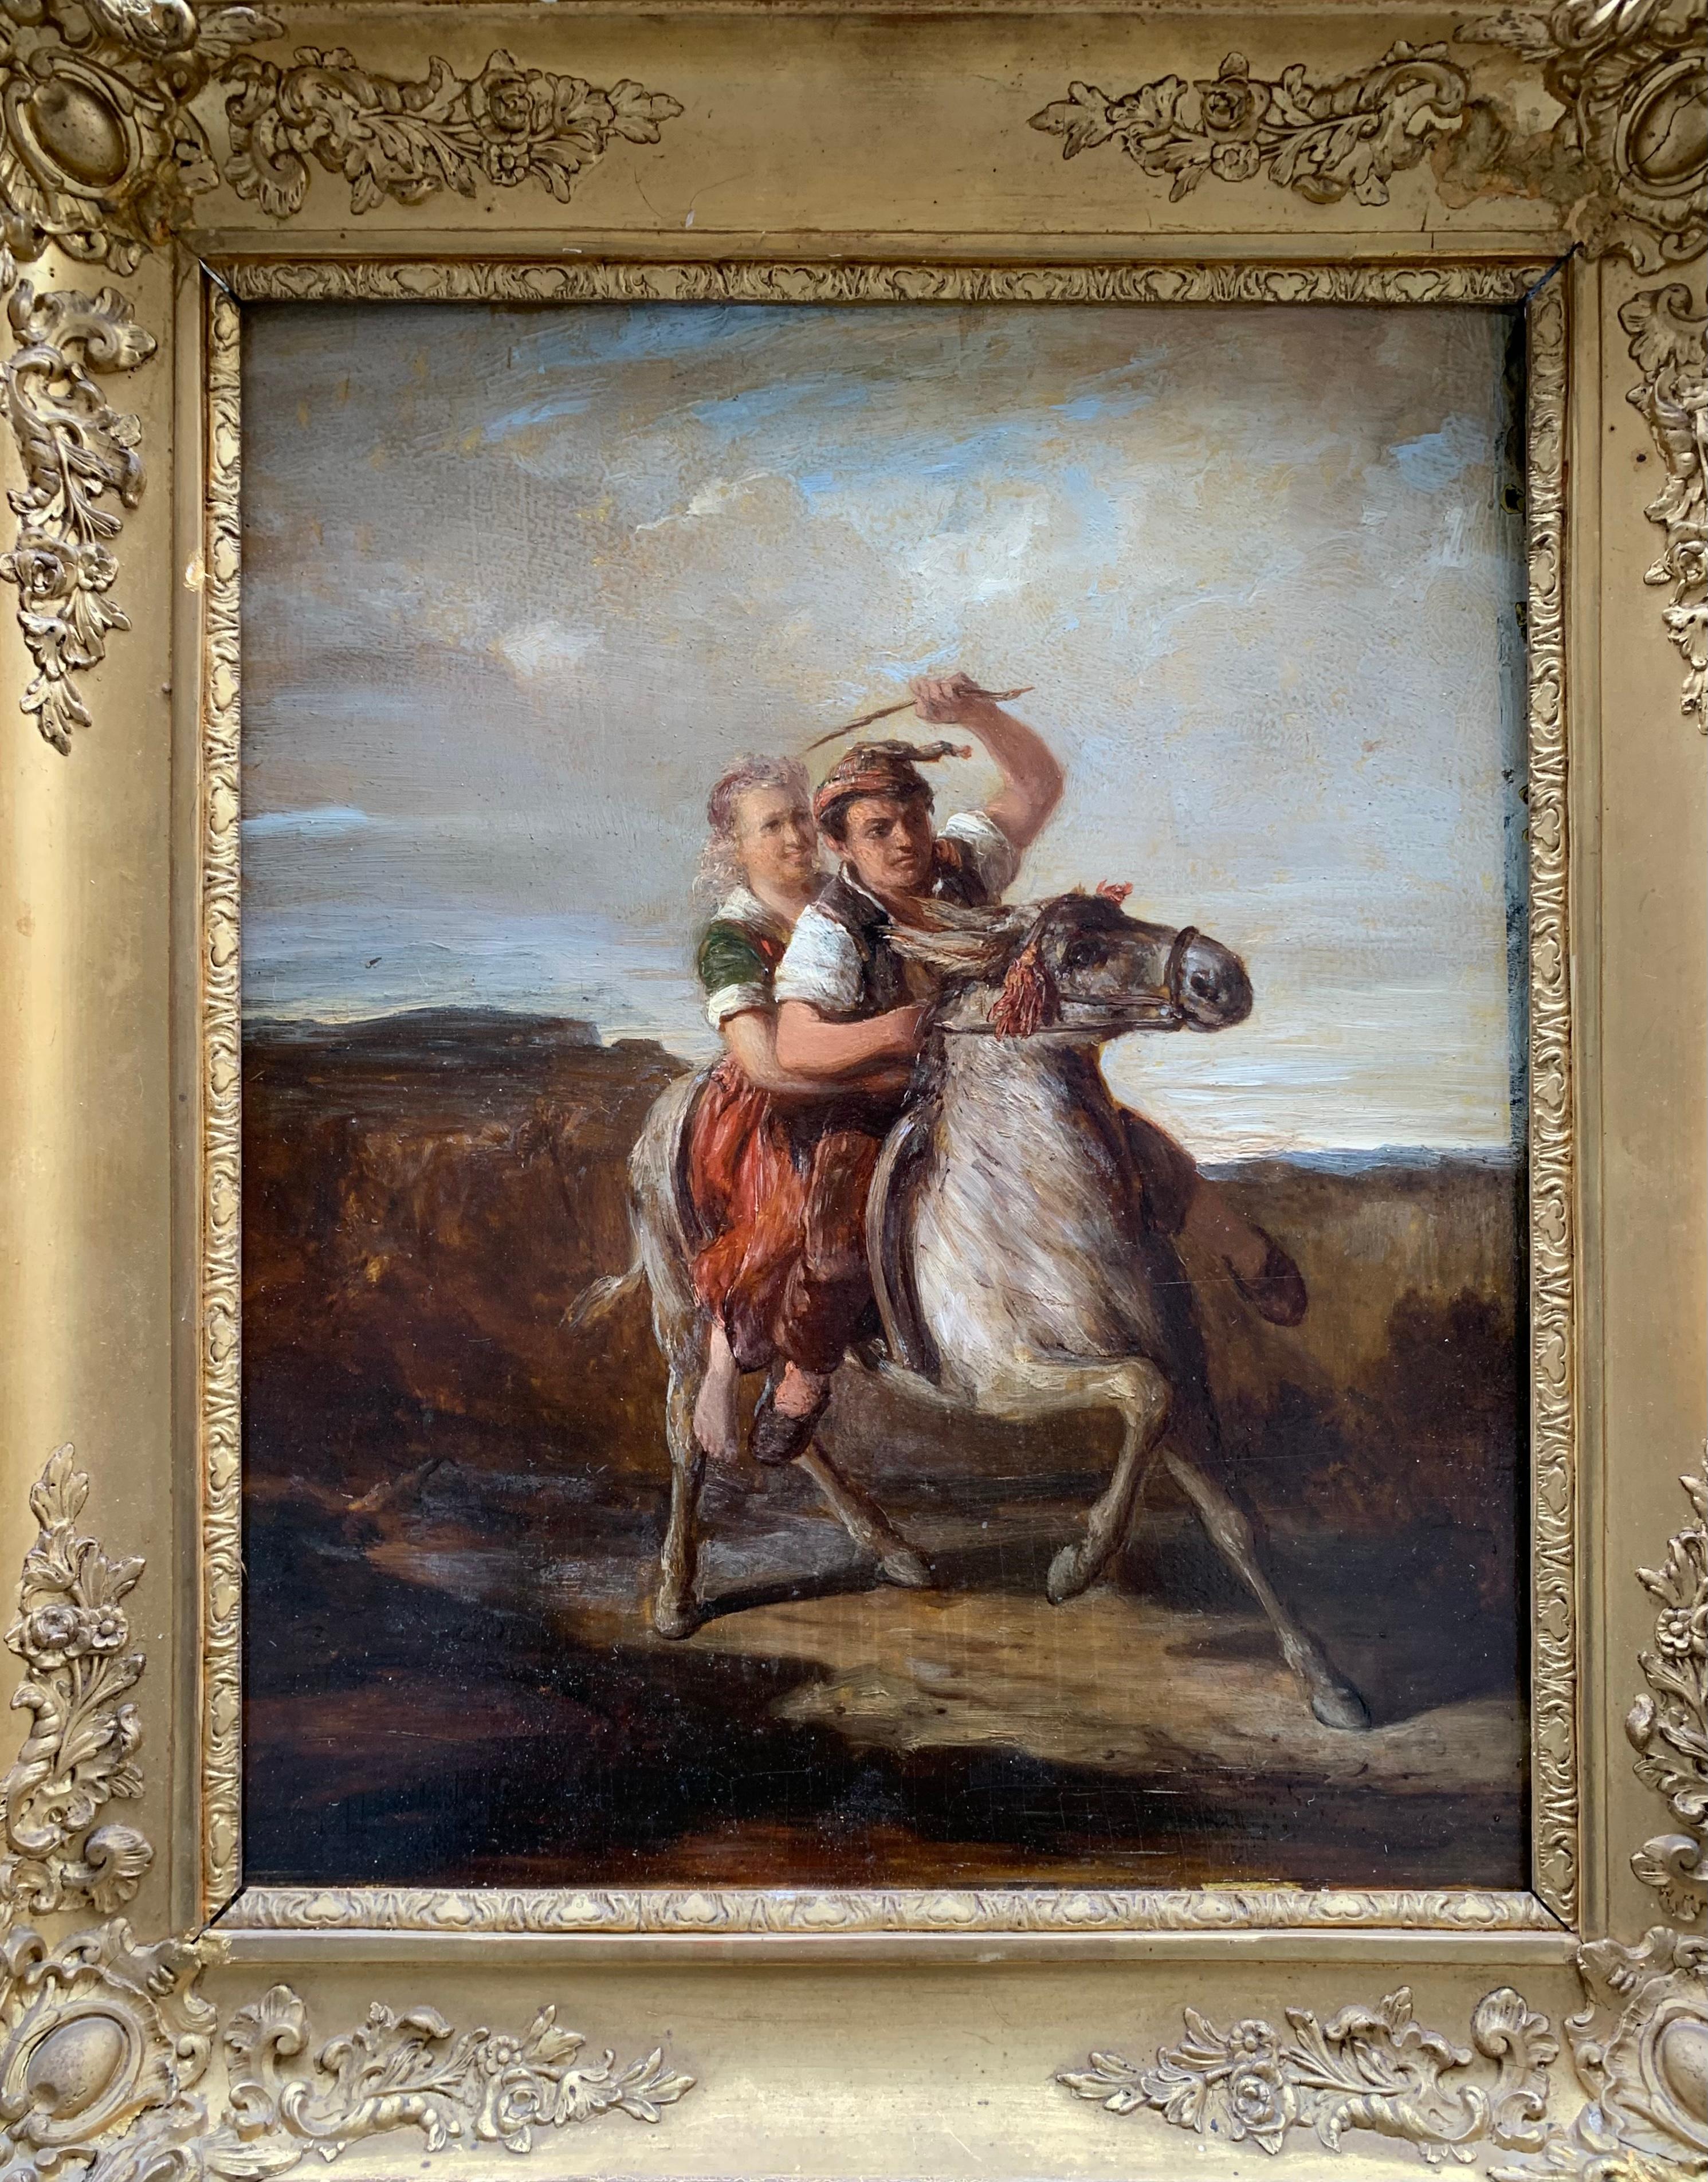 A couple of young boy and girl, dressed in ethnographic costumes, probably Savoyard, ride a donkey. 
The scene takes place in the middle of the countryside with mountains in the background.
Style: romanticism. 
Technique: oil on panel, with